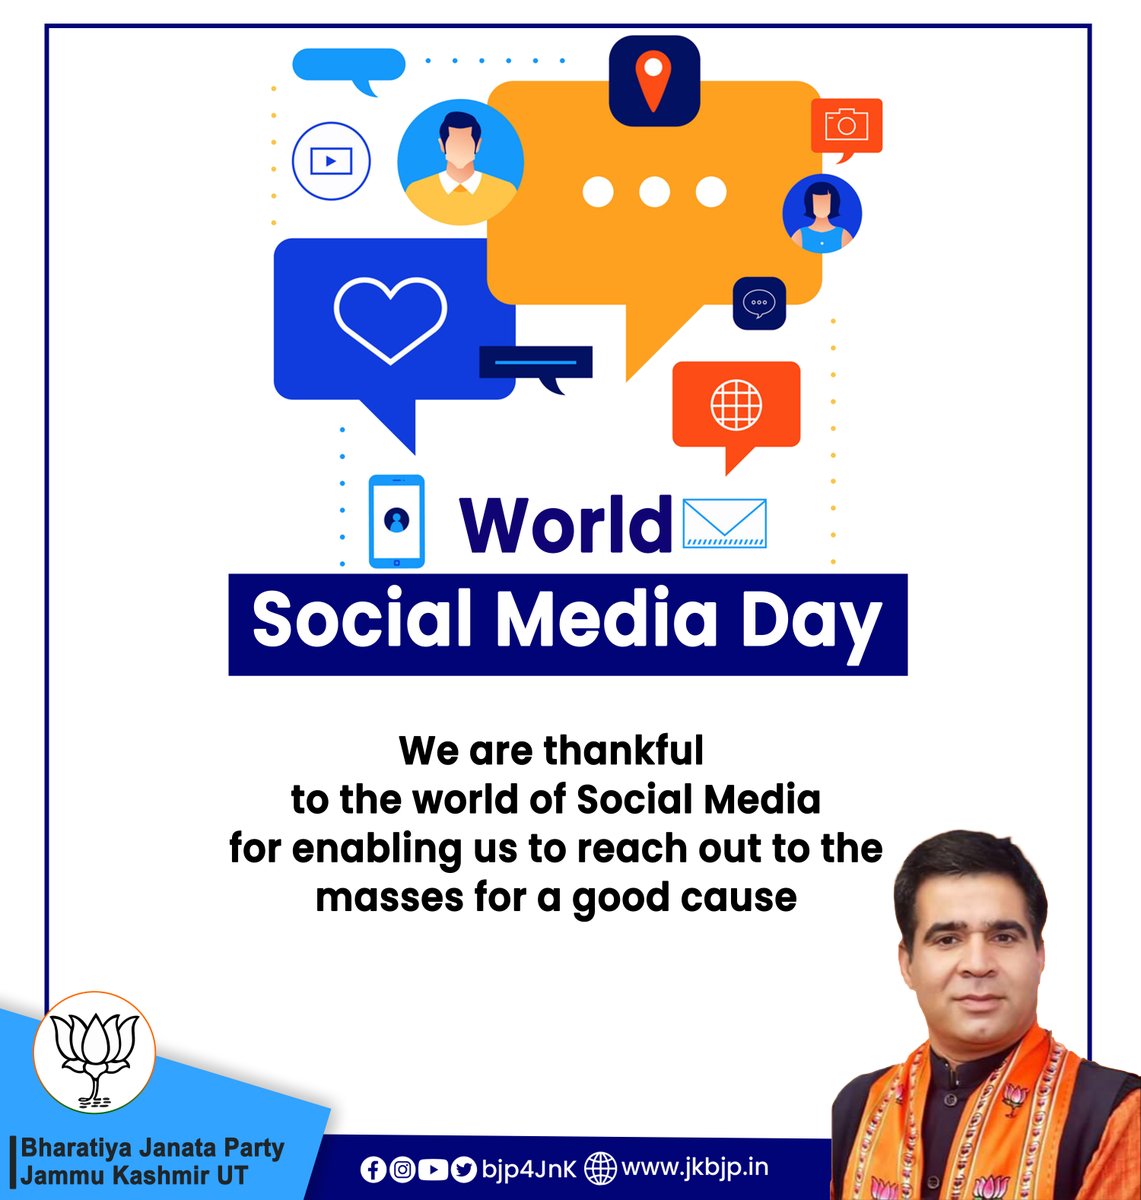 We are thankful to the world of Social Media for enabling us to reach out to the masses for a good cause.

#WorldSocialMediaDay